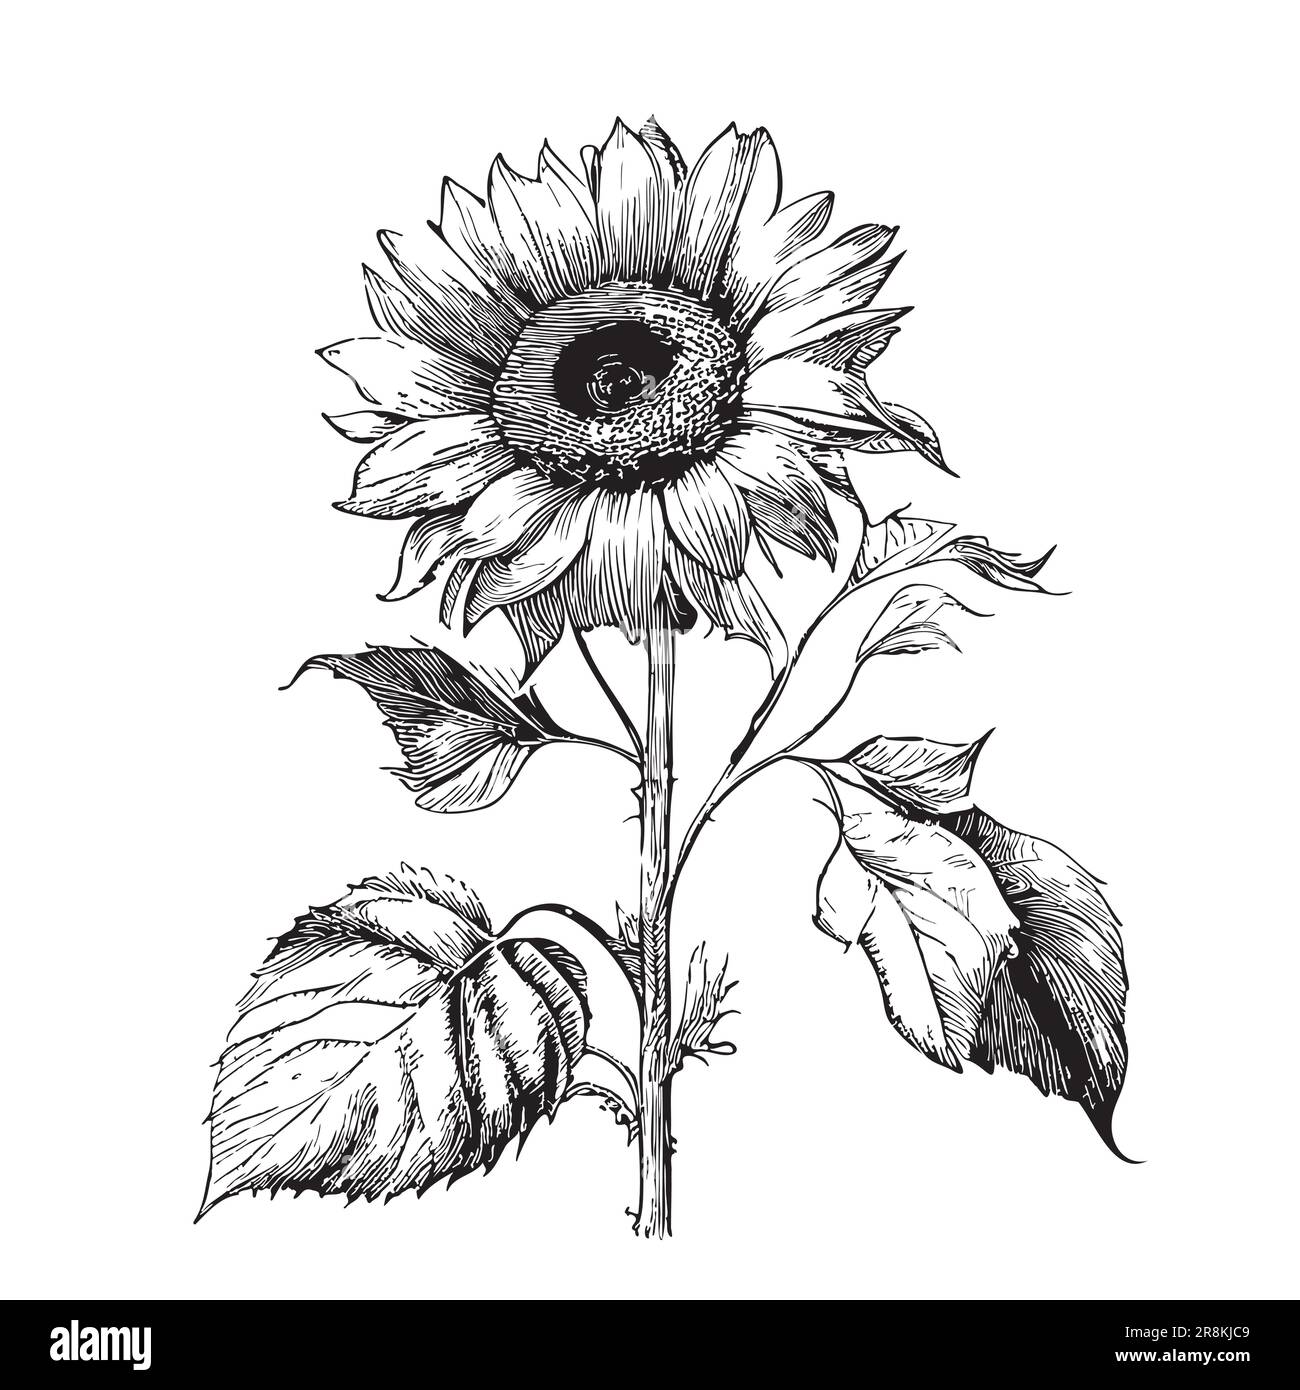 Sunflower sketch hand drawn in doodle style illustration Stock Vector